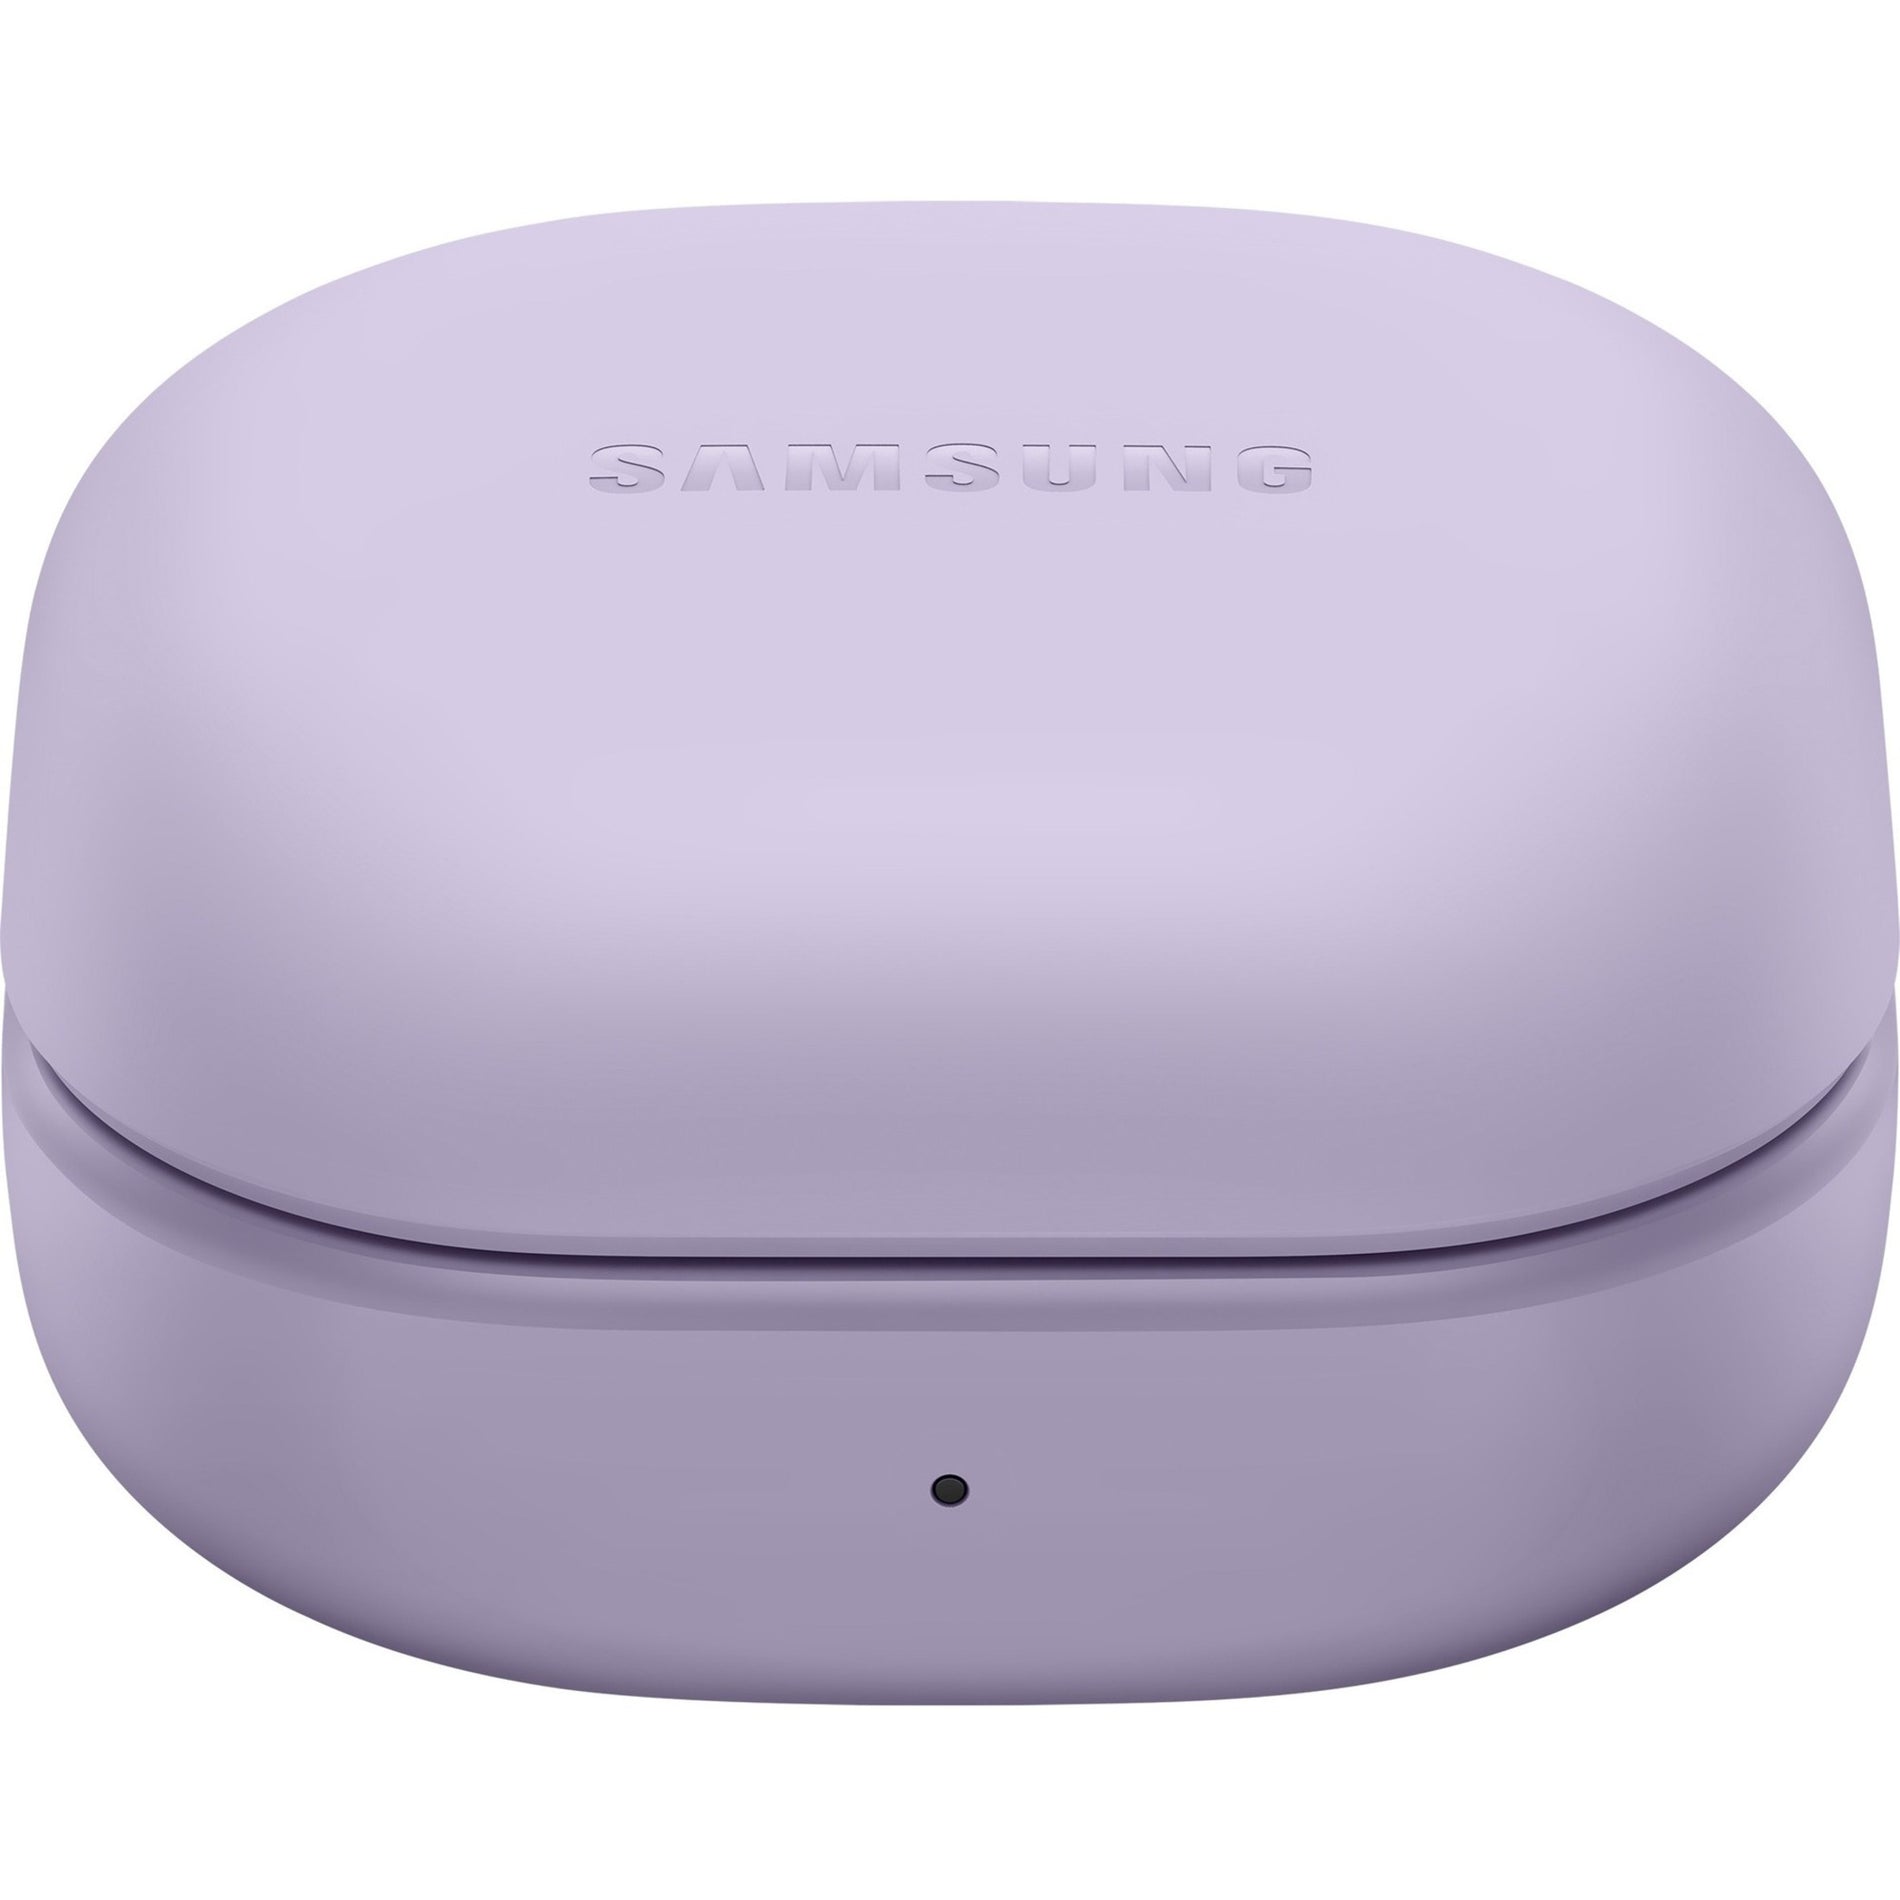 Samsung SM-R510NLVAXAR Galaxy Buds2 Pro, Bora Purple - True Wireless Earset with Active Noise Canceling